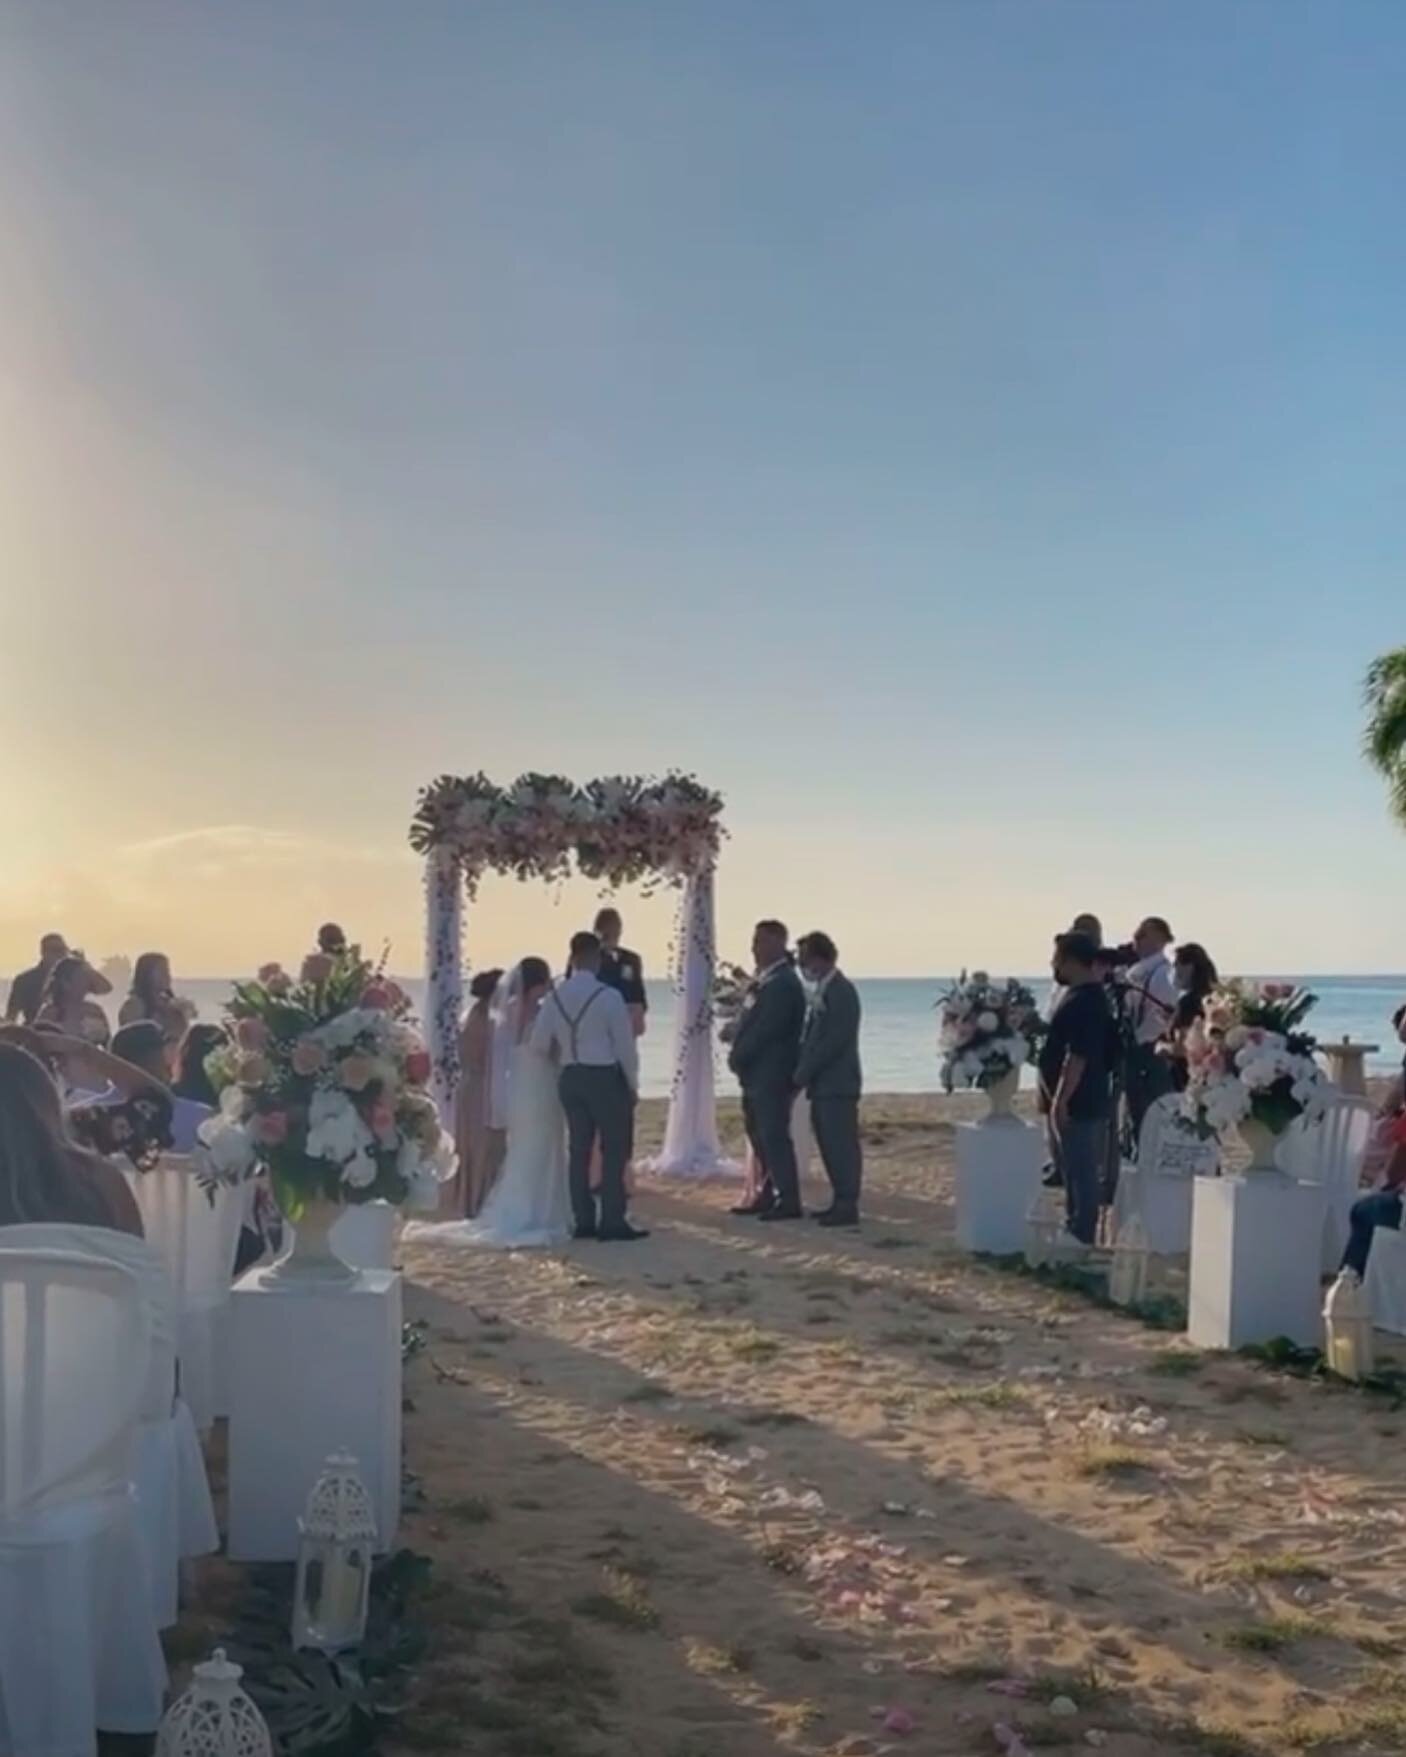 We&rsquo;re so thankful and happy for our &ldquo;baby&rdquo; brother AJ and his wife Sierra! We can&rsquo;t believe our ring &ldquo;boy&rdquo; is now married. Congratulations! We wish we could have flown to Saipan to be there for your special day! We